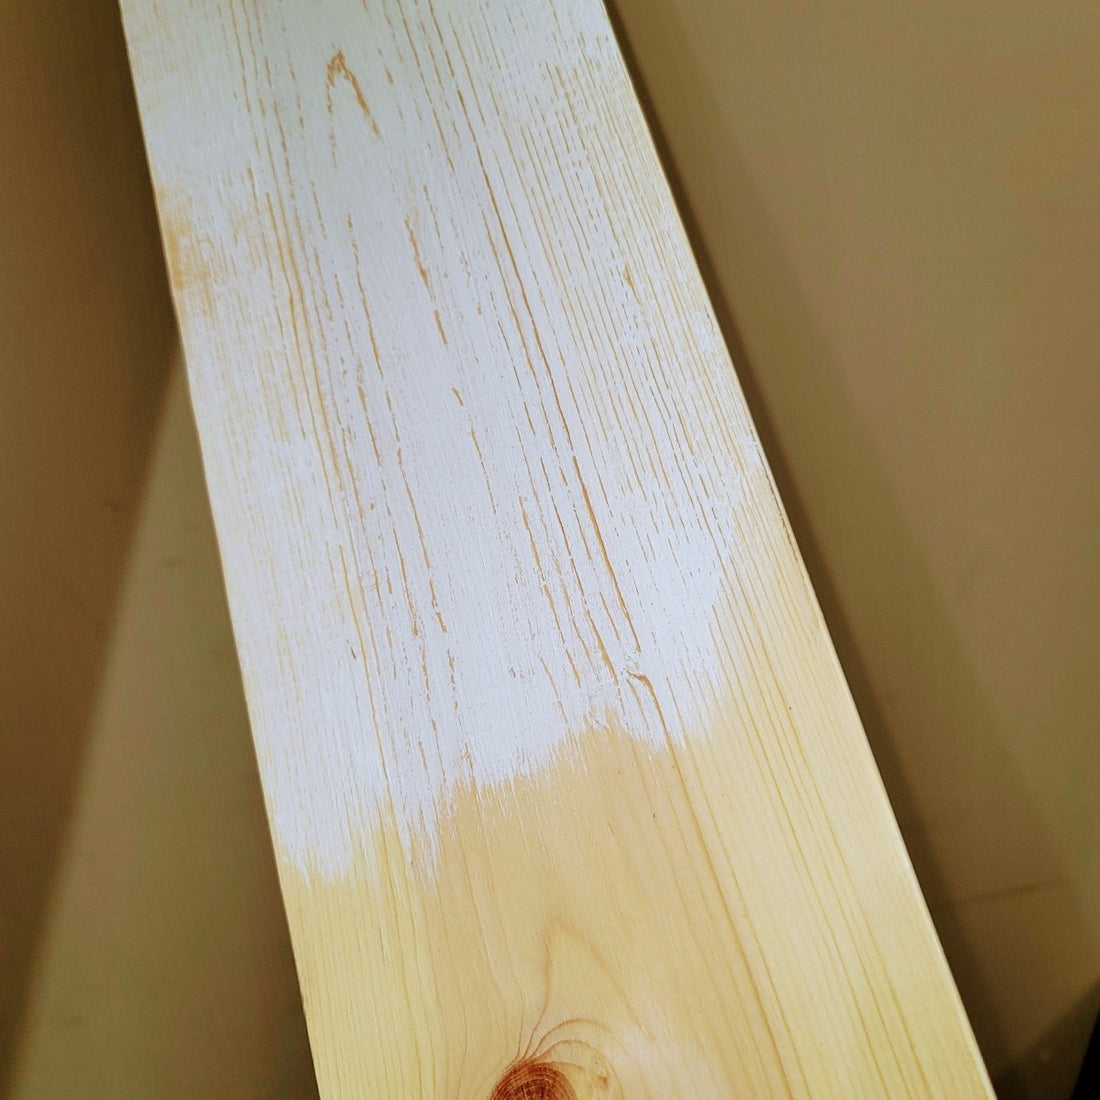 Painting on wood: Primer, Sealer or do I use both? - be creative